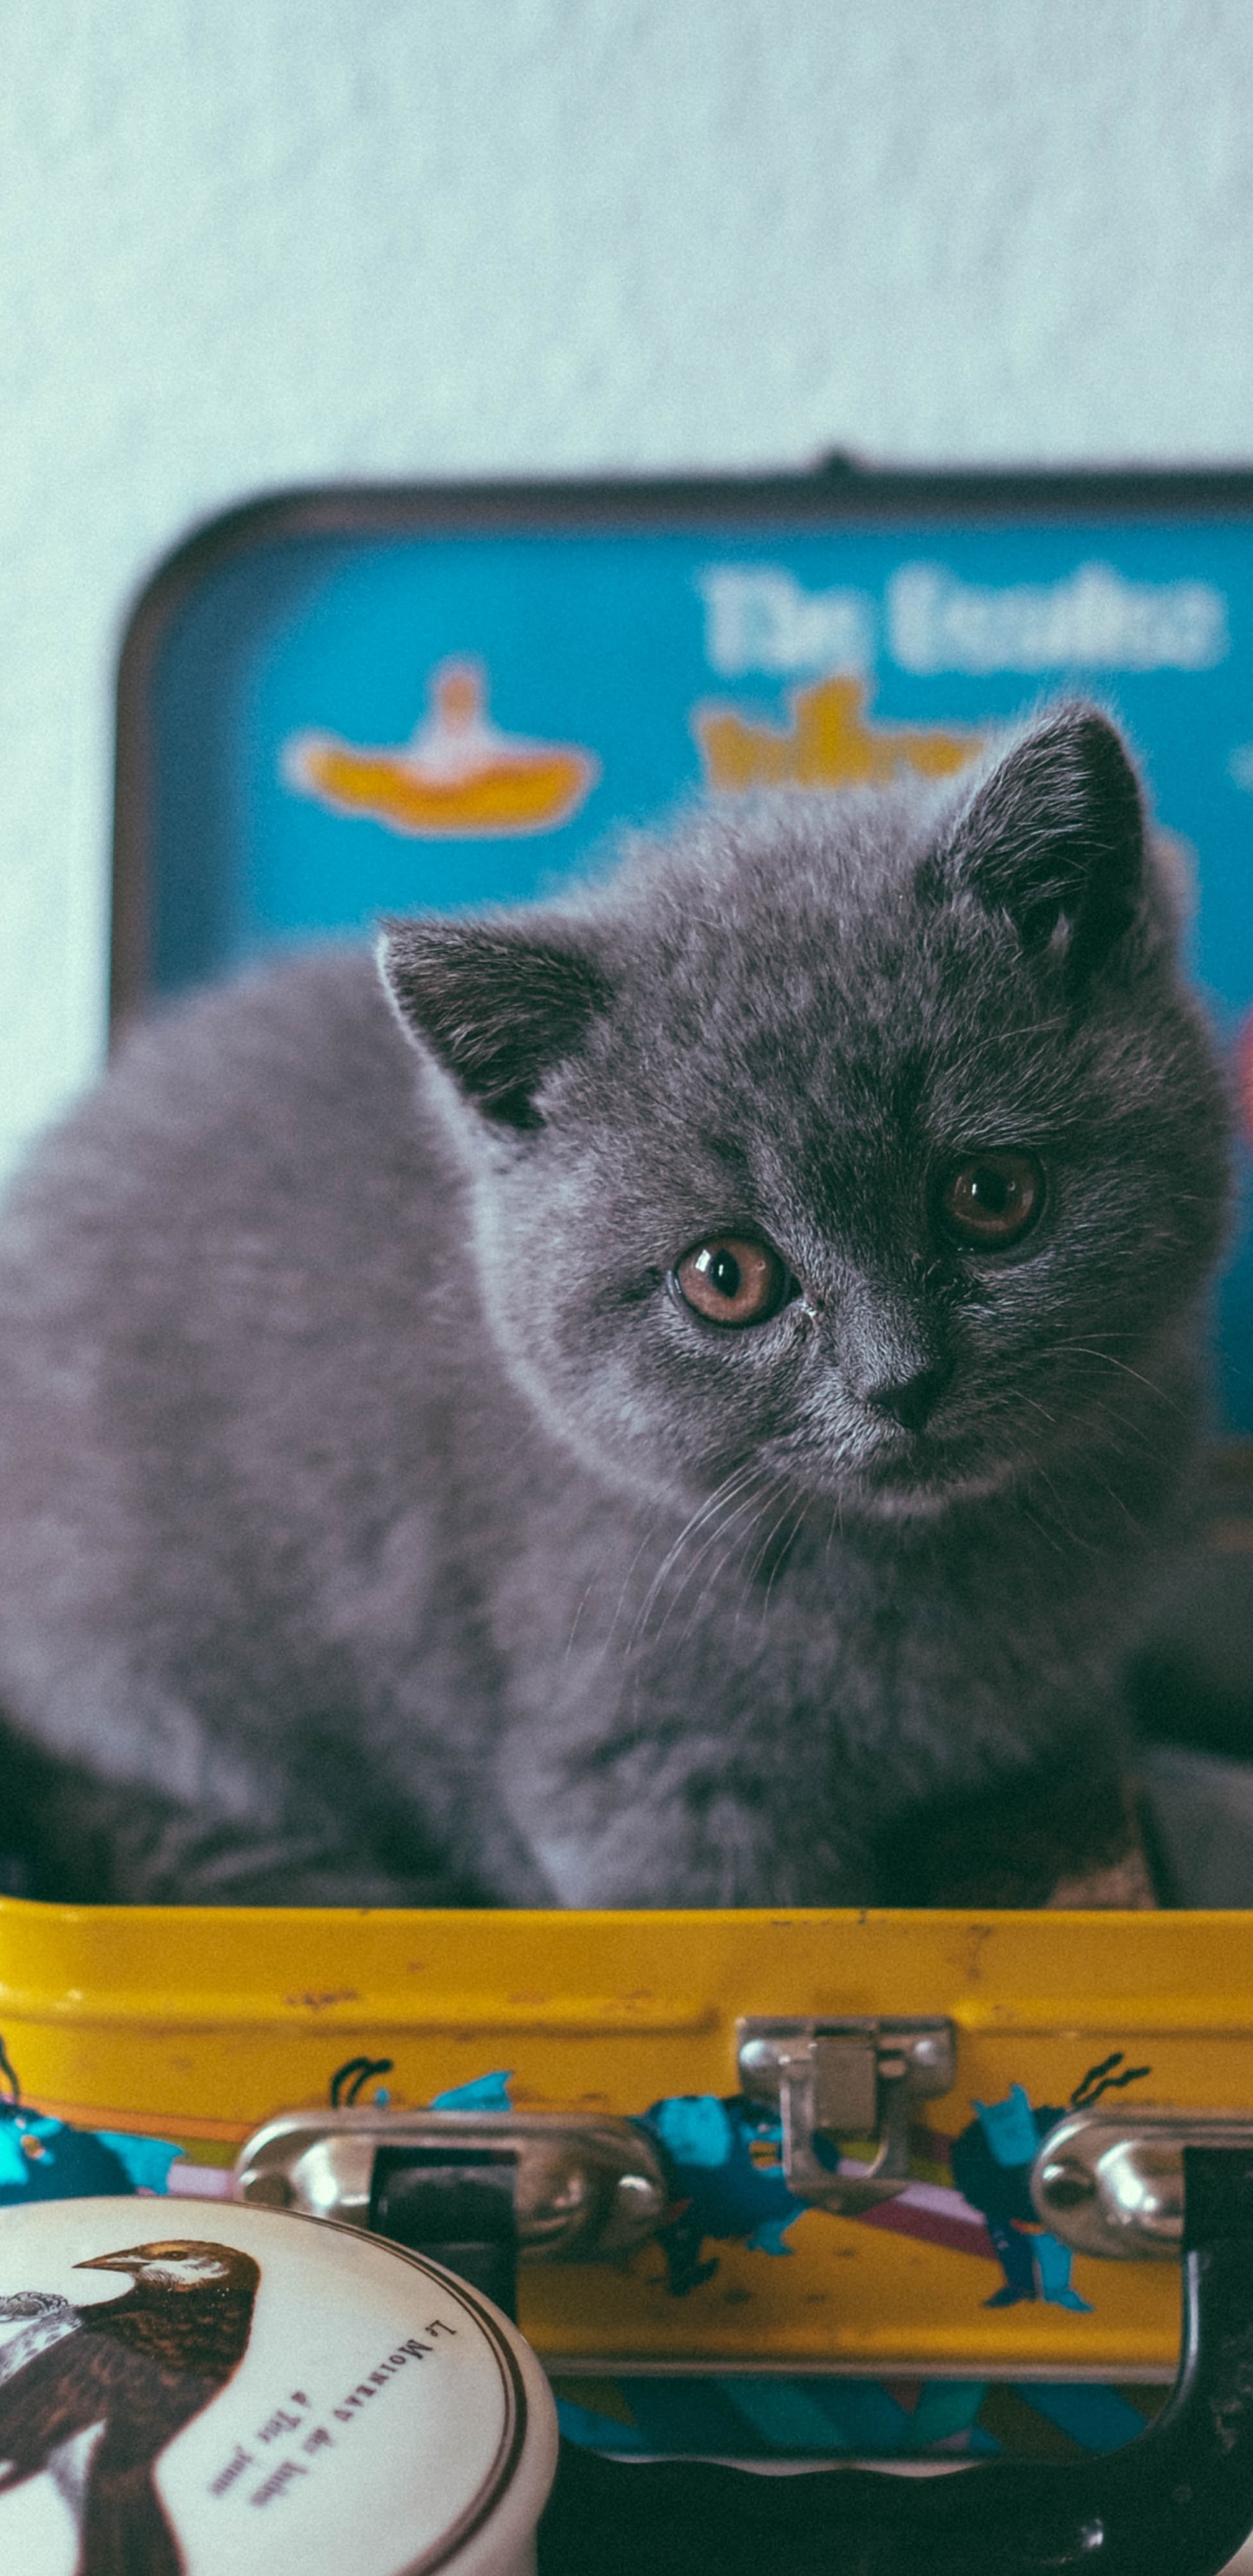 Gray Cat on Yellow and Blue Plastic Container. Wallpaper in 1440x2960 Resolution